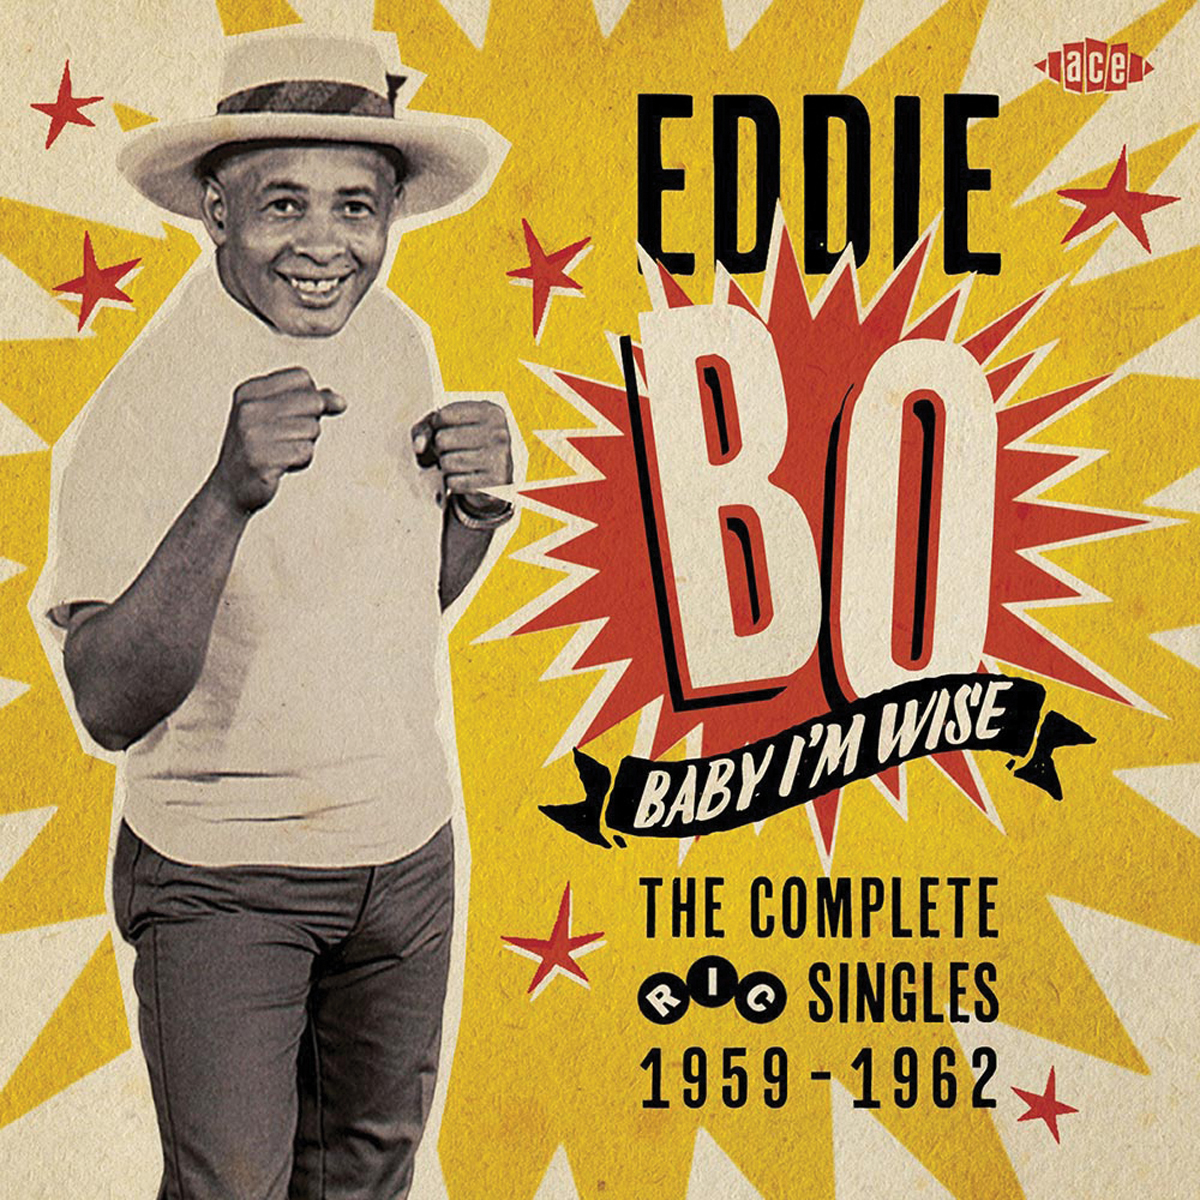 Eddie Bo, Baby I’m Wise: The Complete Ric Singles 1959-1962 (Album Review)